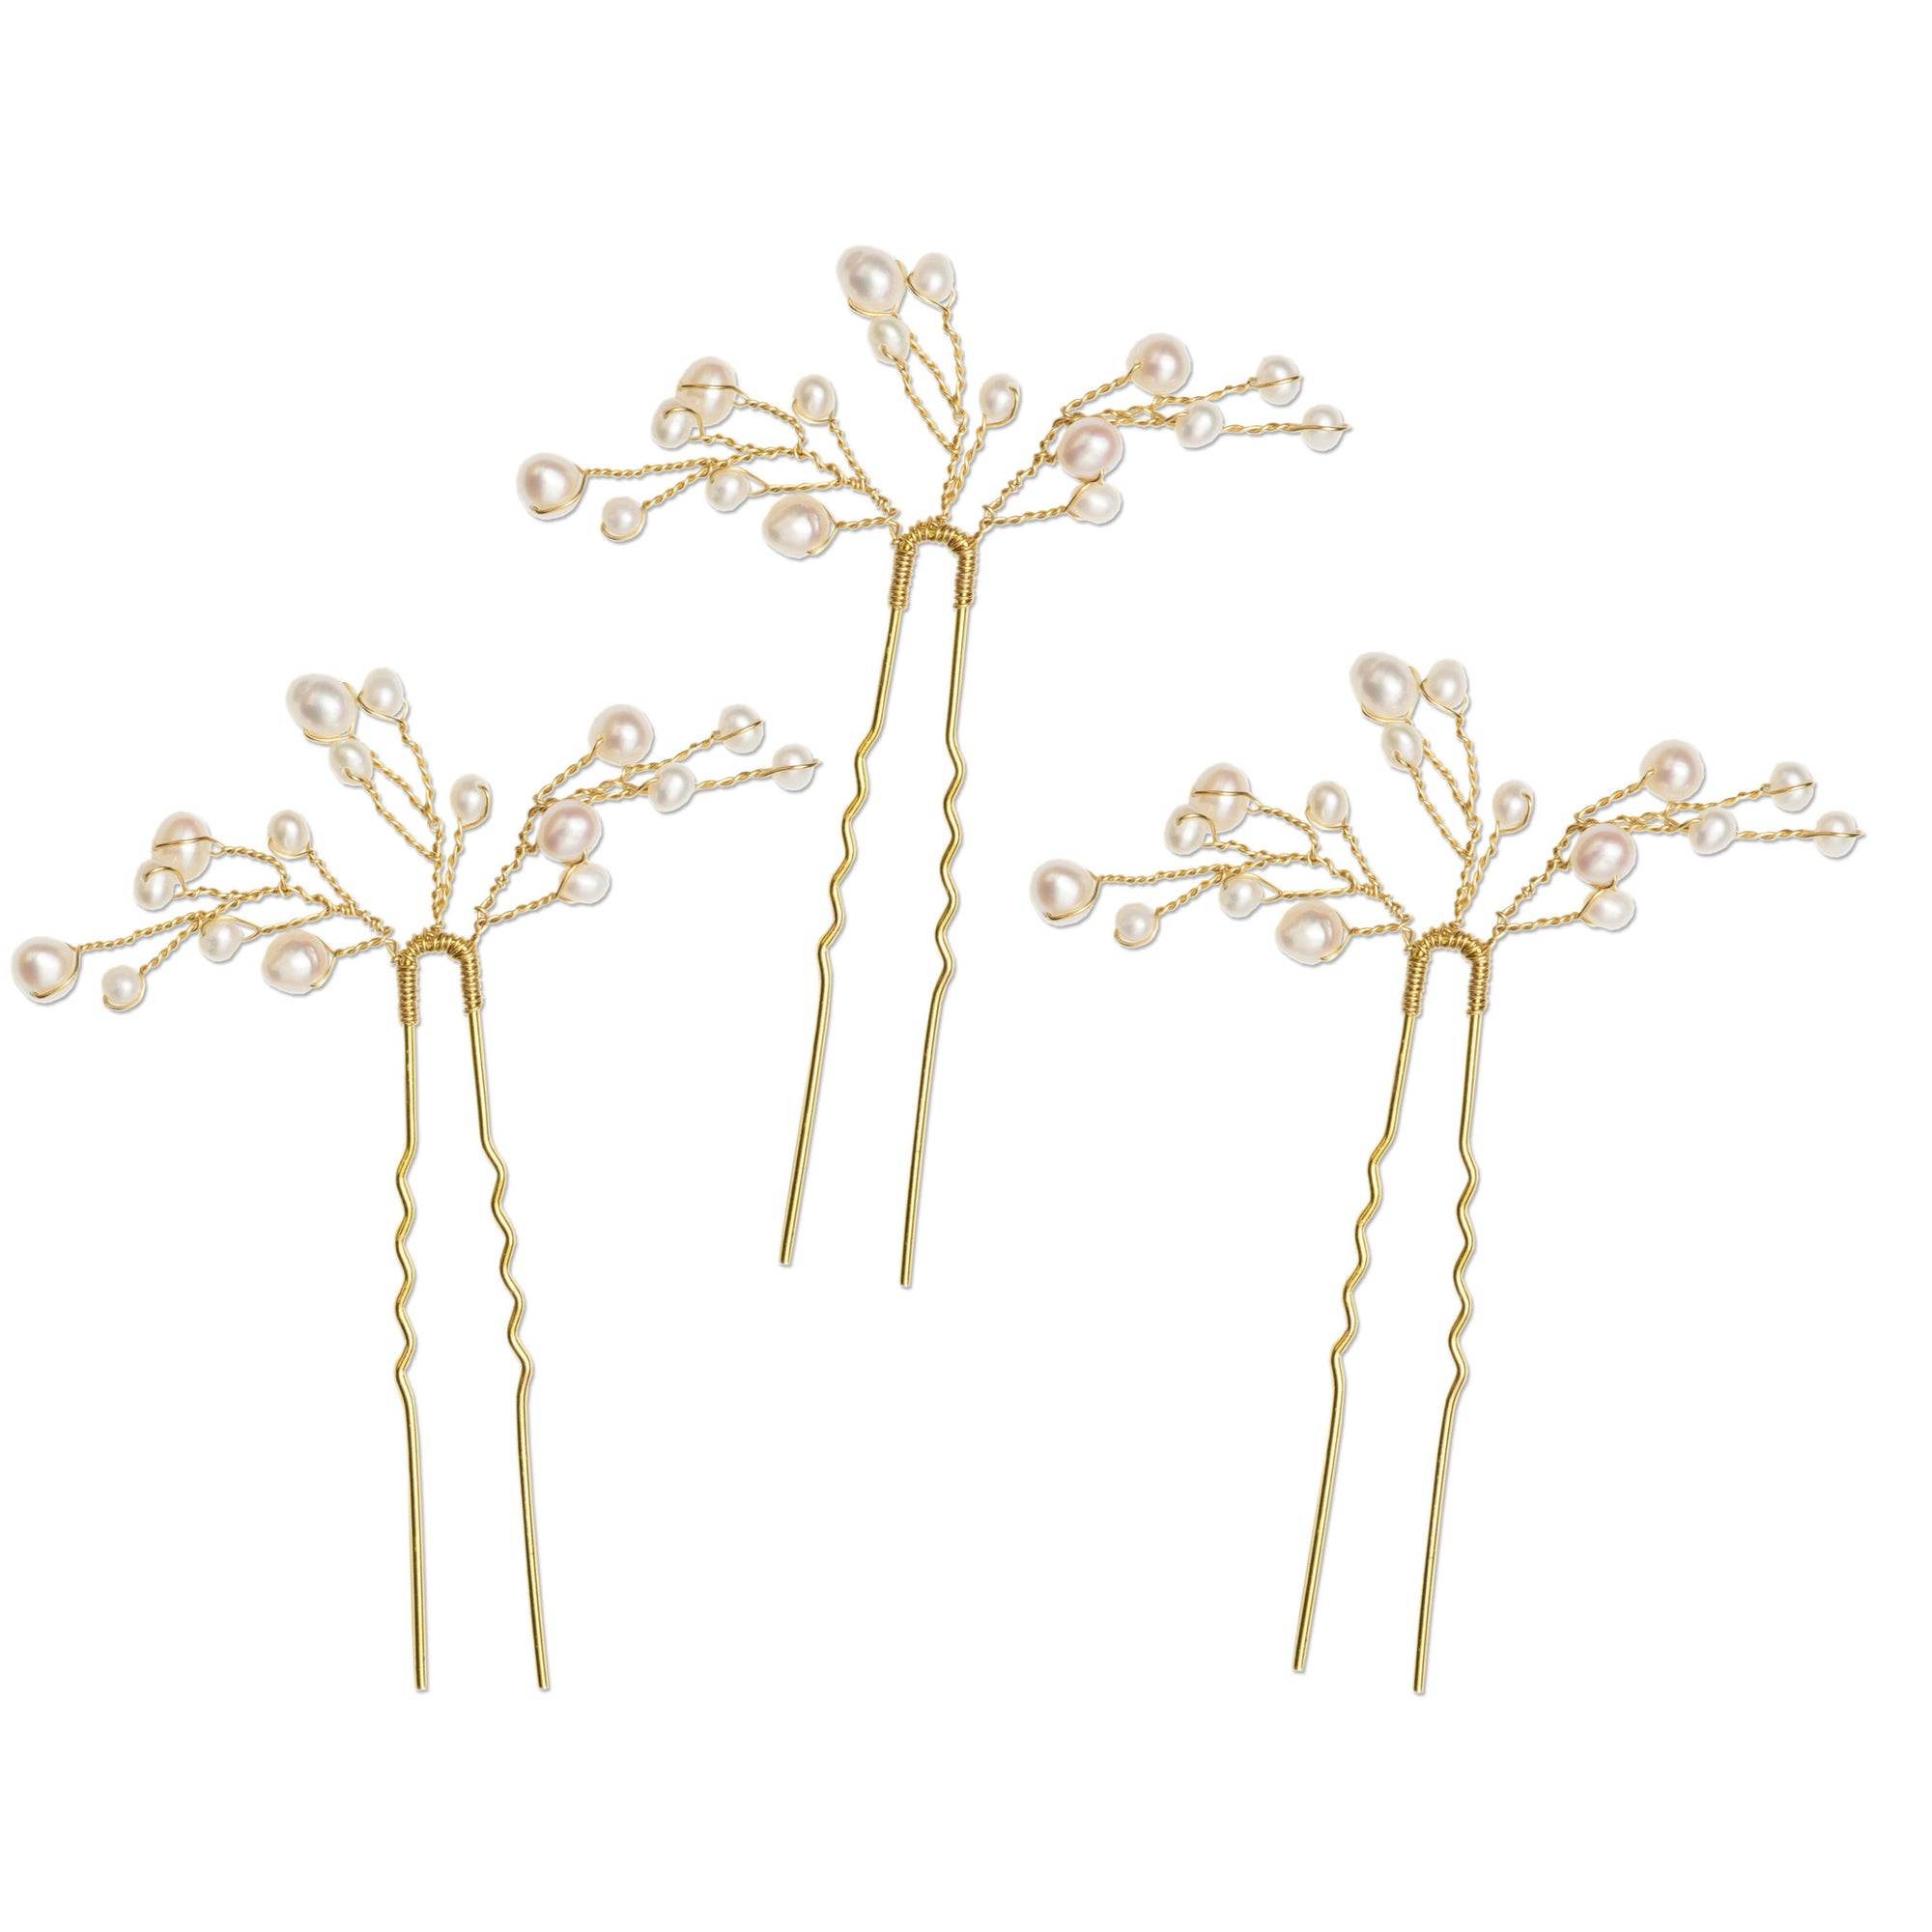 Review of our Pearl Spray Wedding Hair Pins in Gold